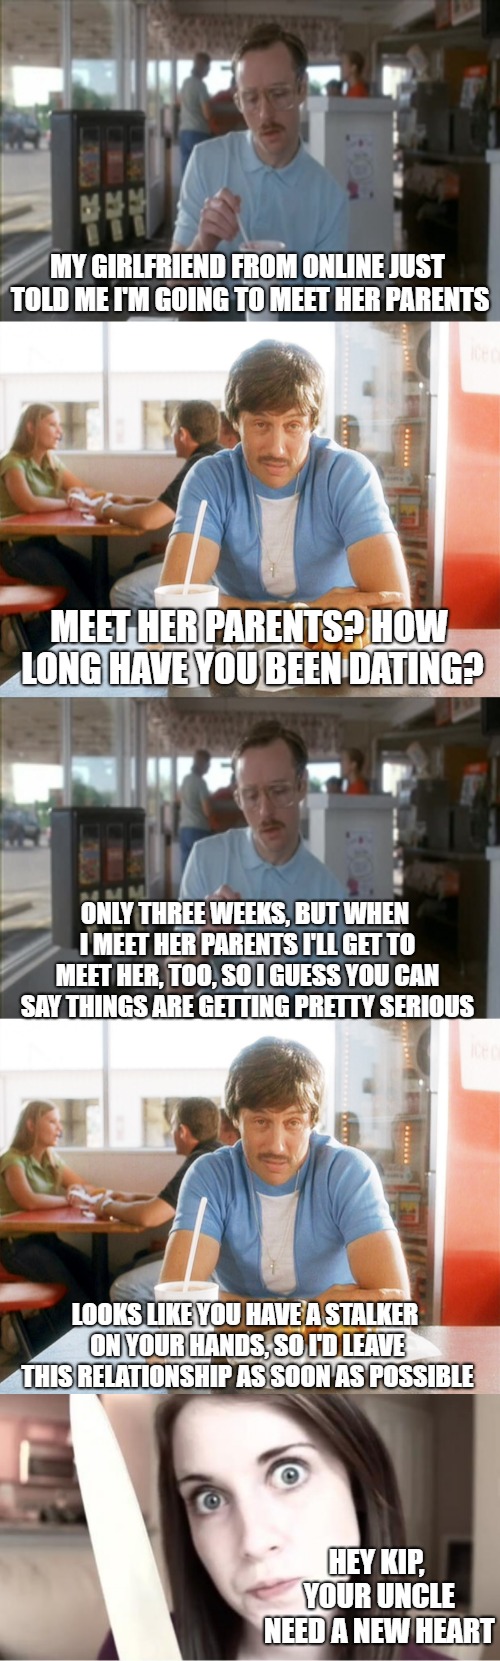 MY GIRLFRIEND FROM ONLINE JUST TOLD ME I'M GOING TO MEET HER PARENTS; MEET HER PARENTS? HOW LONG HAVE YOU BEEN DATING? ONLY THREE WEEKS, BUT WHEN I MEET HER PARENTS I'LL GET TO MEET HER, TOO, SO I GUESS YOU CAN SAY THINGS ARE GETTING PRETTY SERIOUS; LOOKS LIKE YOU HAVE A STALKER ON YOUR HANDS, SO I'D LEAVE THIS RELATIONSHIP AS SOON AS POSSIBLE; HEY KIP, YOUR UNCLE NEED A NEW HEART | image tagged in memes,so i guess you can say things are getting pretty serious,overly attached girlfriend knife,uncle rico,napoleon dynamite,ori | made w/ Imgflip meme maker